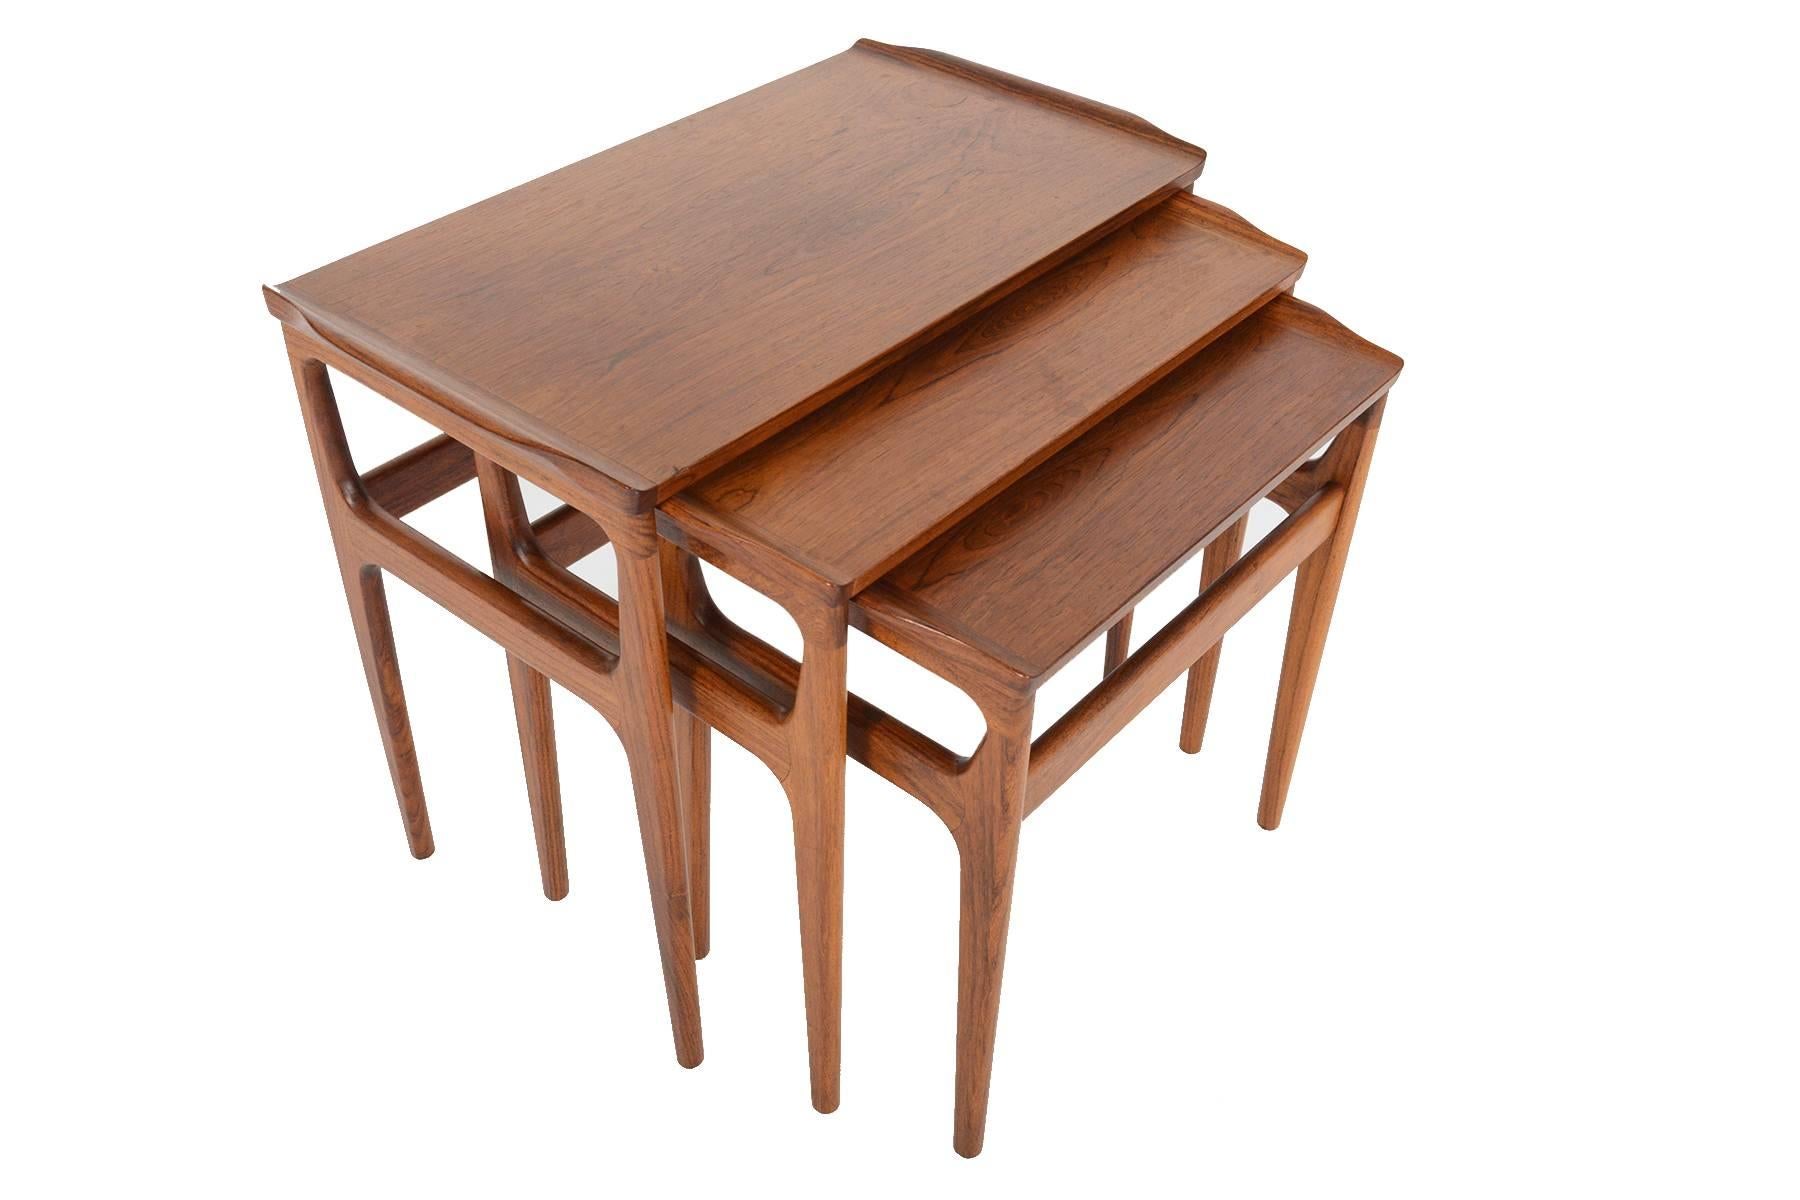 This wonderful set of Danish modern Mid-Century nesting tables in Brazilian rosewood by Heltborg Mobler are extremely versatile. Table tops feature a delicate raised lip on either end for convenient handling. Beautifully tapered long rosewood legs